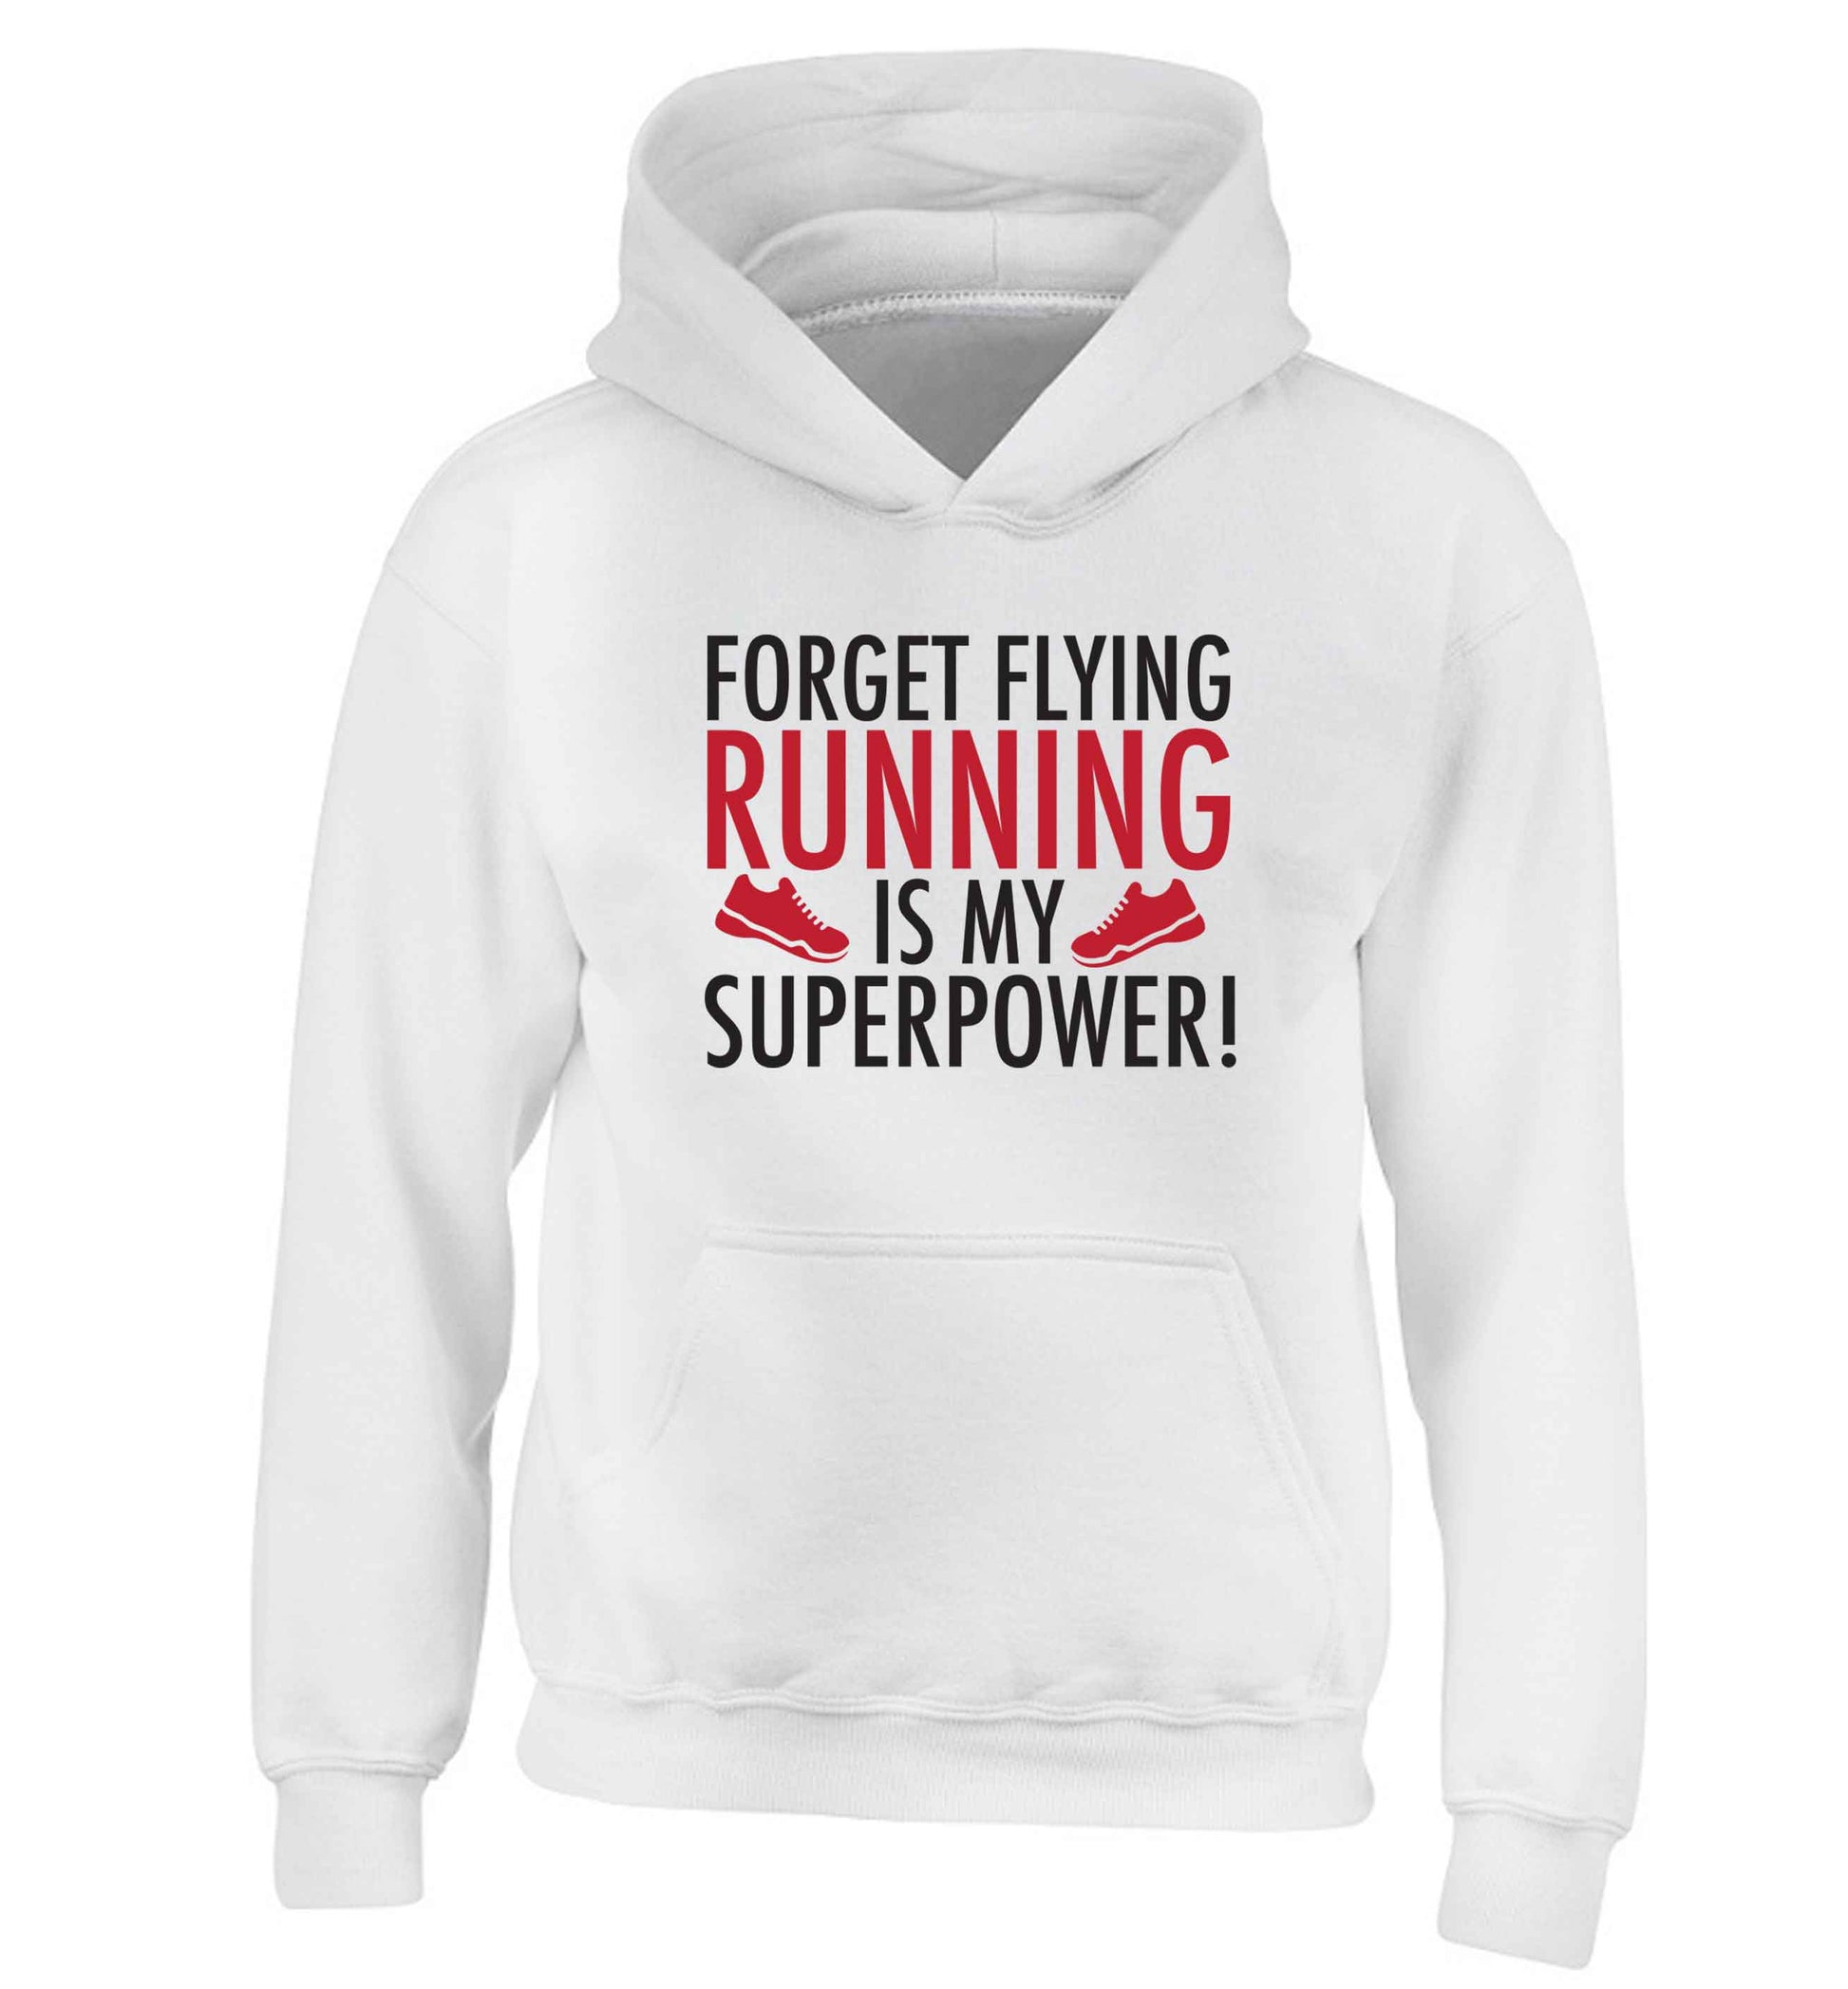 Forget flying running is my superpower children's white hoodie 12-13 Years